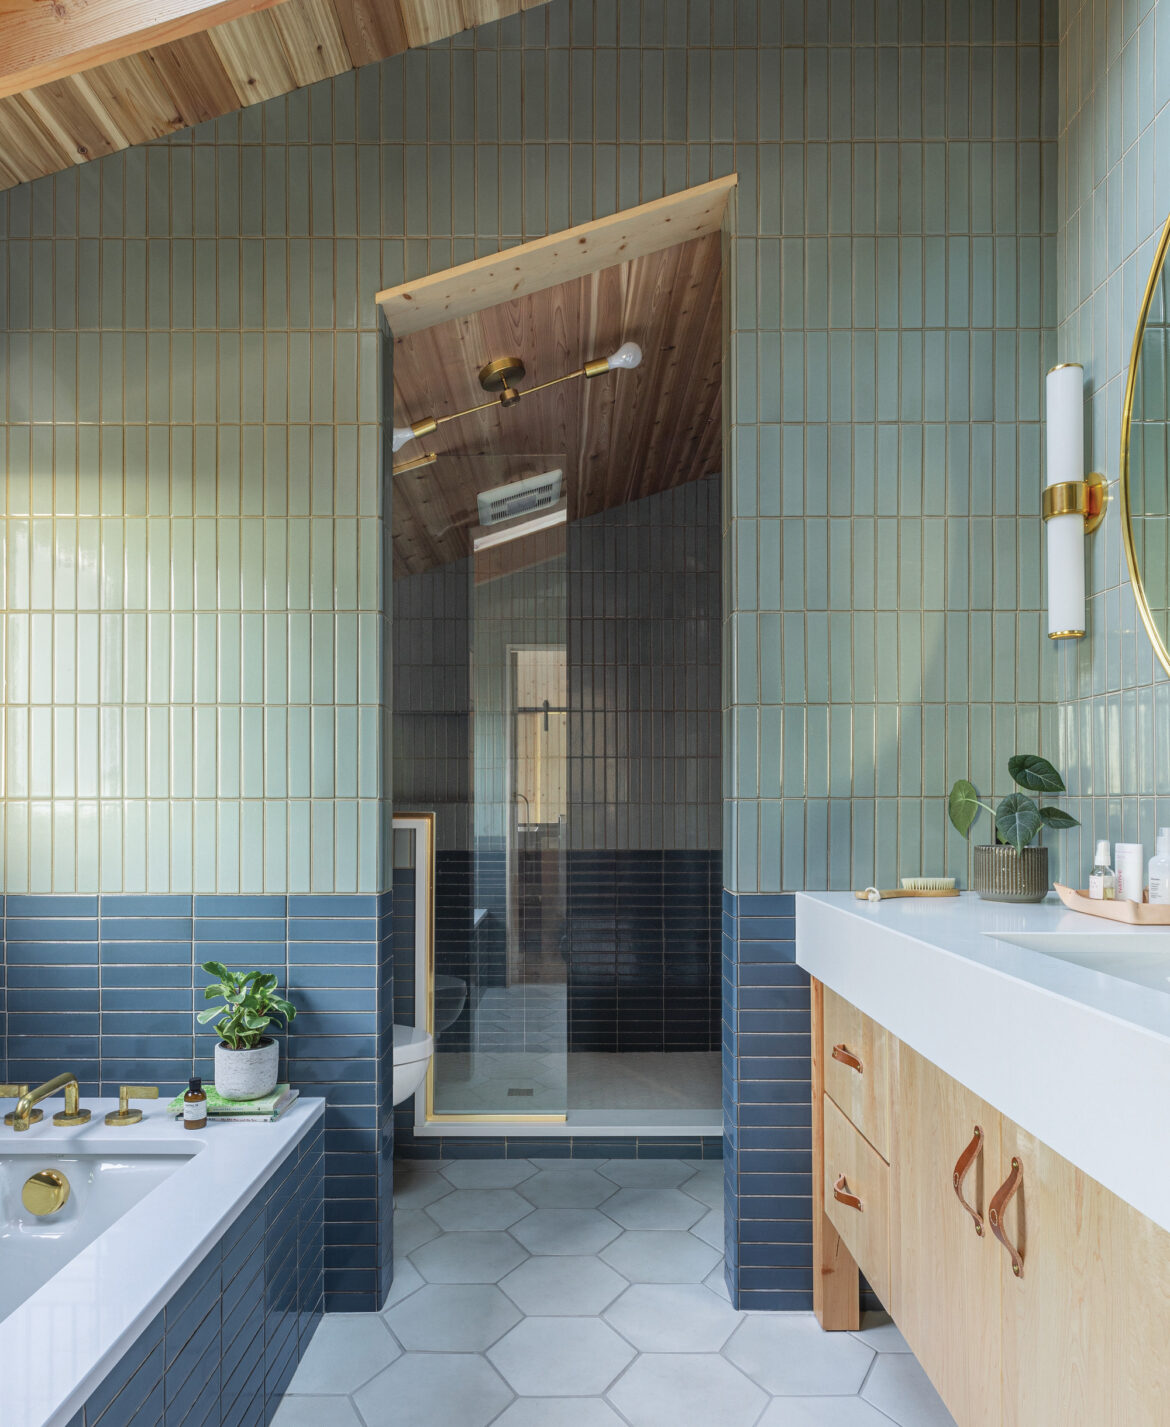 Designer Max Humphrey pulled ocean and sage colors from Manzanita and found the tile to make it work.